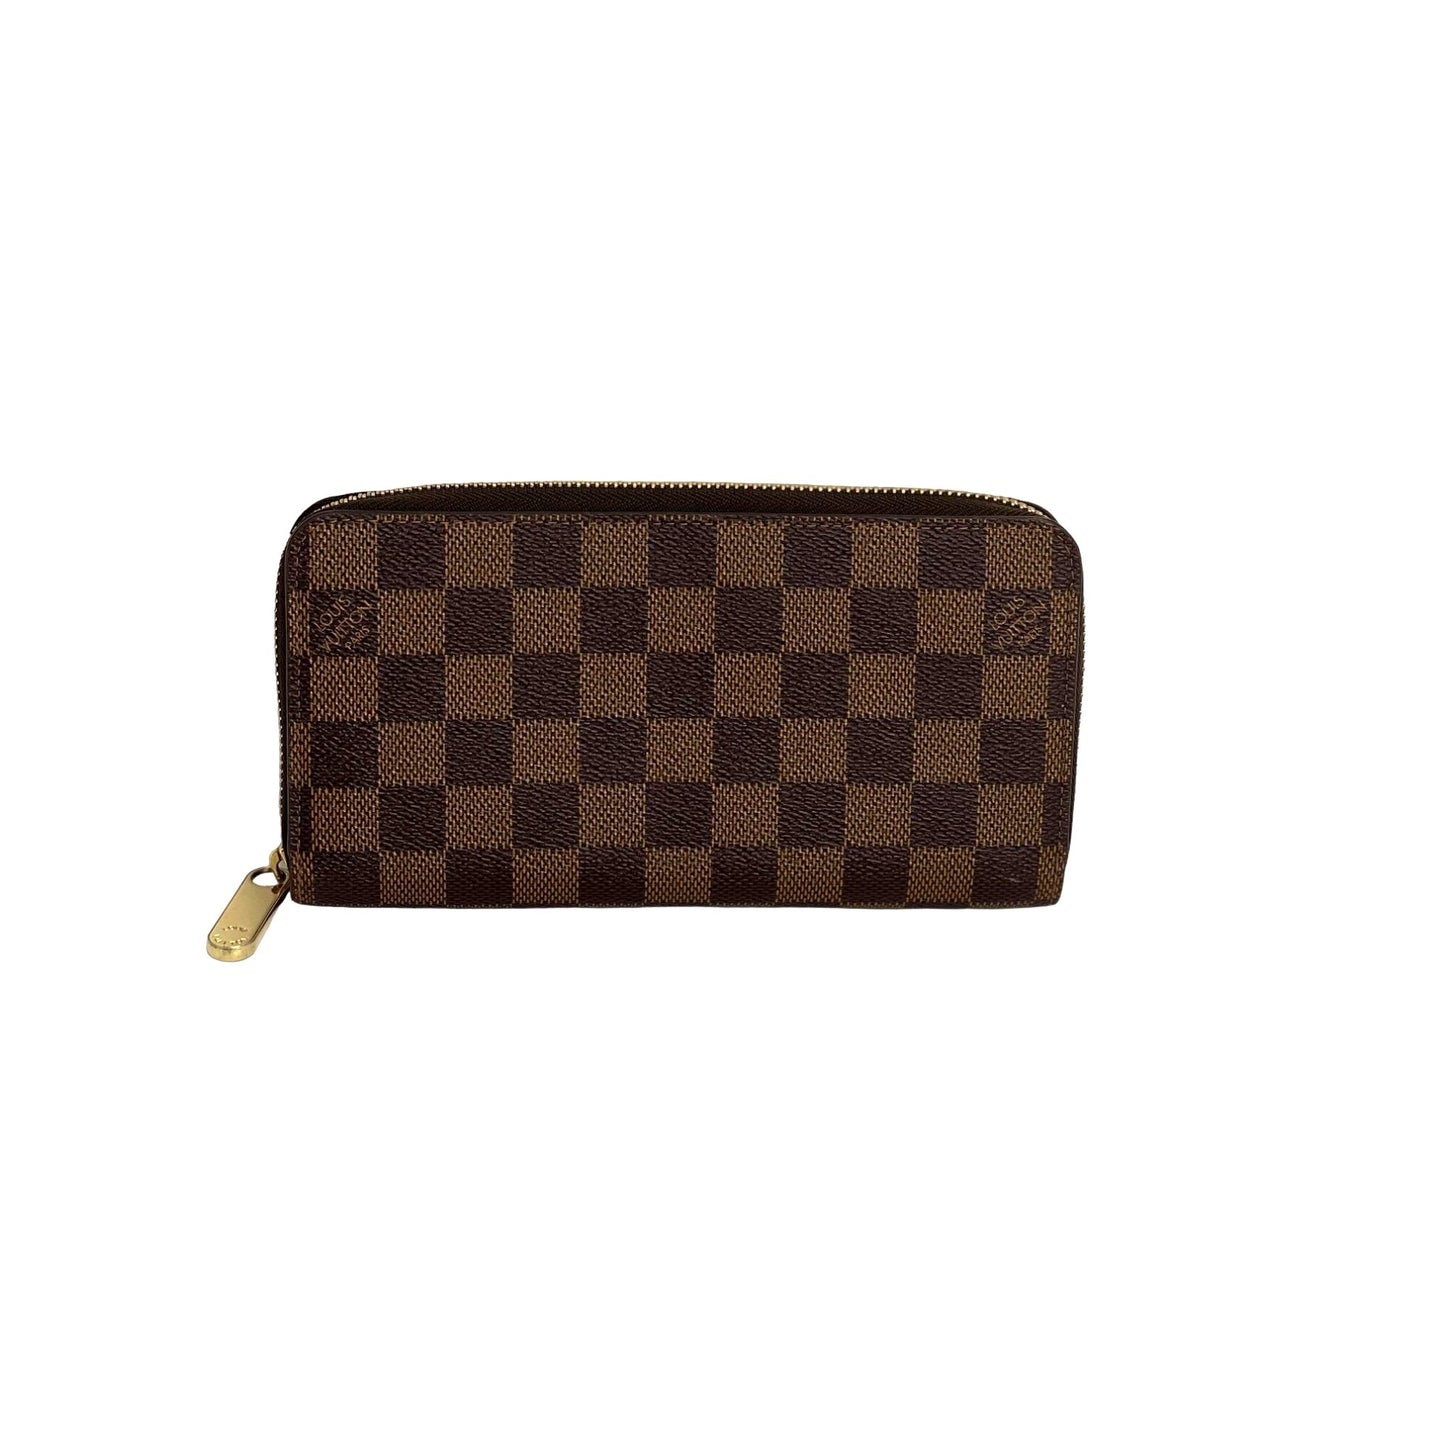 Louis Vuitton Wallets in Bags & Accessories 